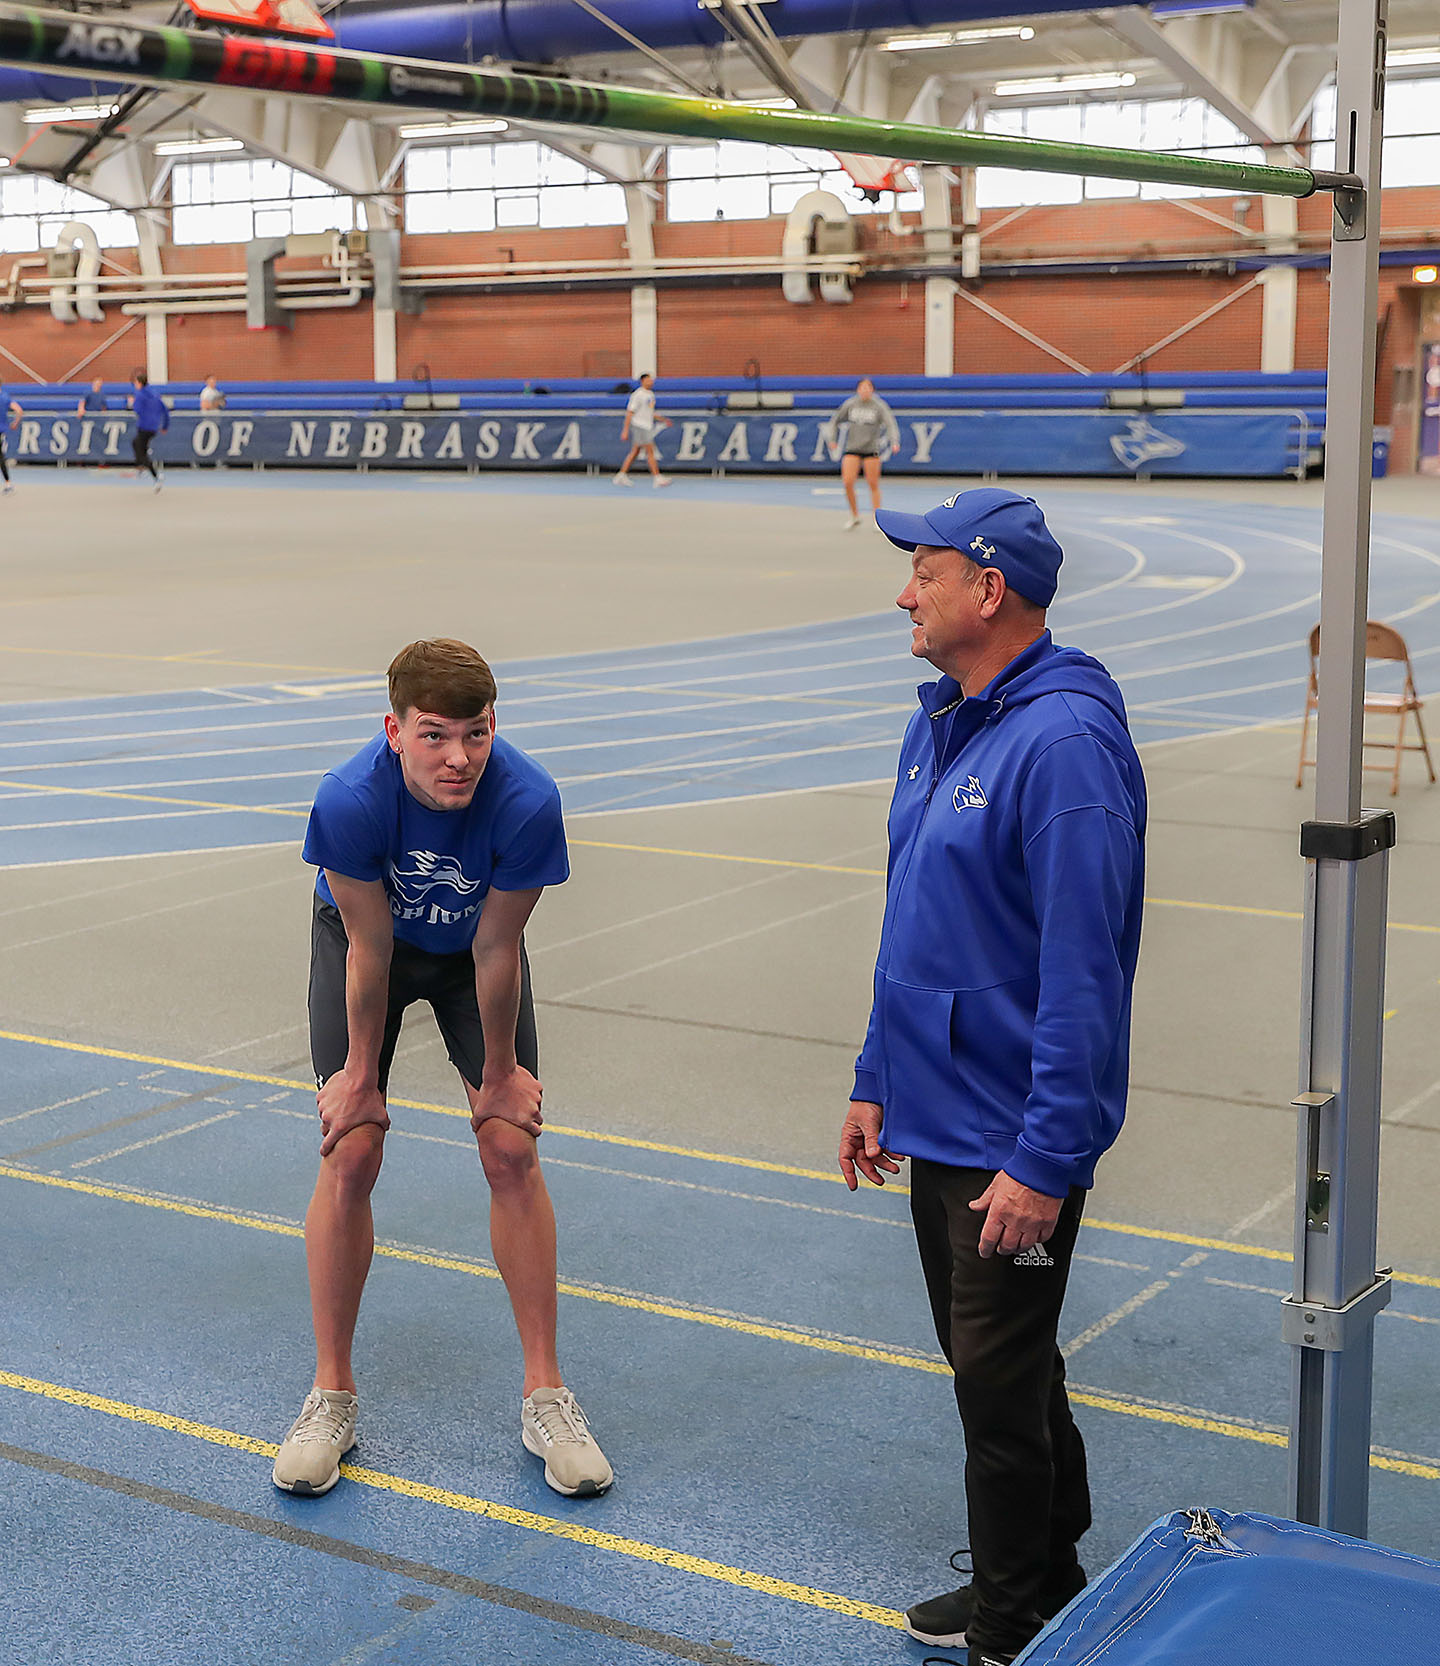 UNK senior Brayden Sorensen and assistant track and field coach Lonny Polacek work together during a recent practice at Cushing Coliseum. (Photo by Erika Pritchard, UNK Communications)